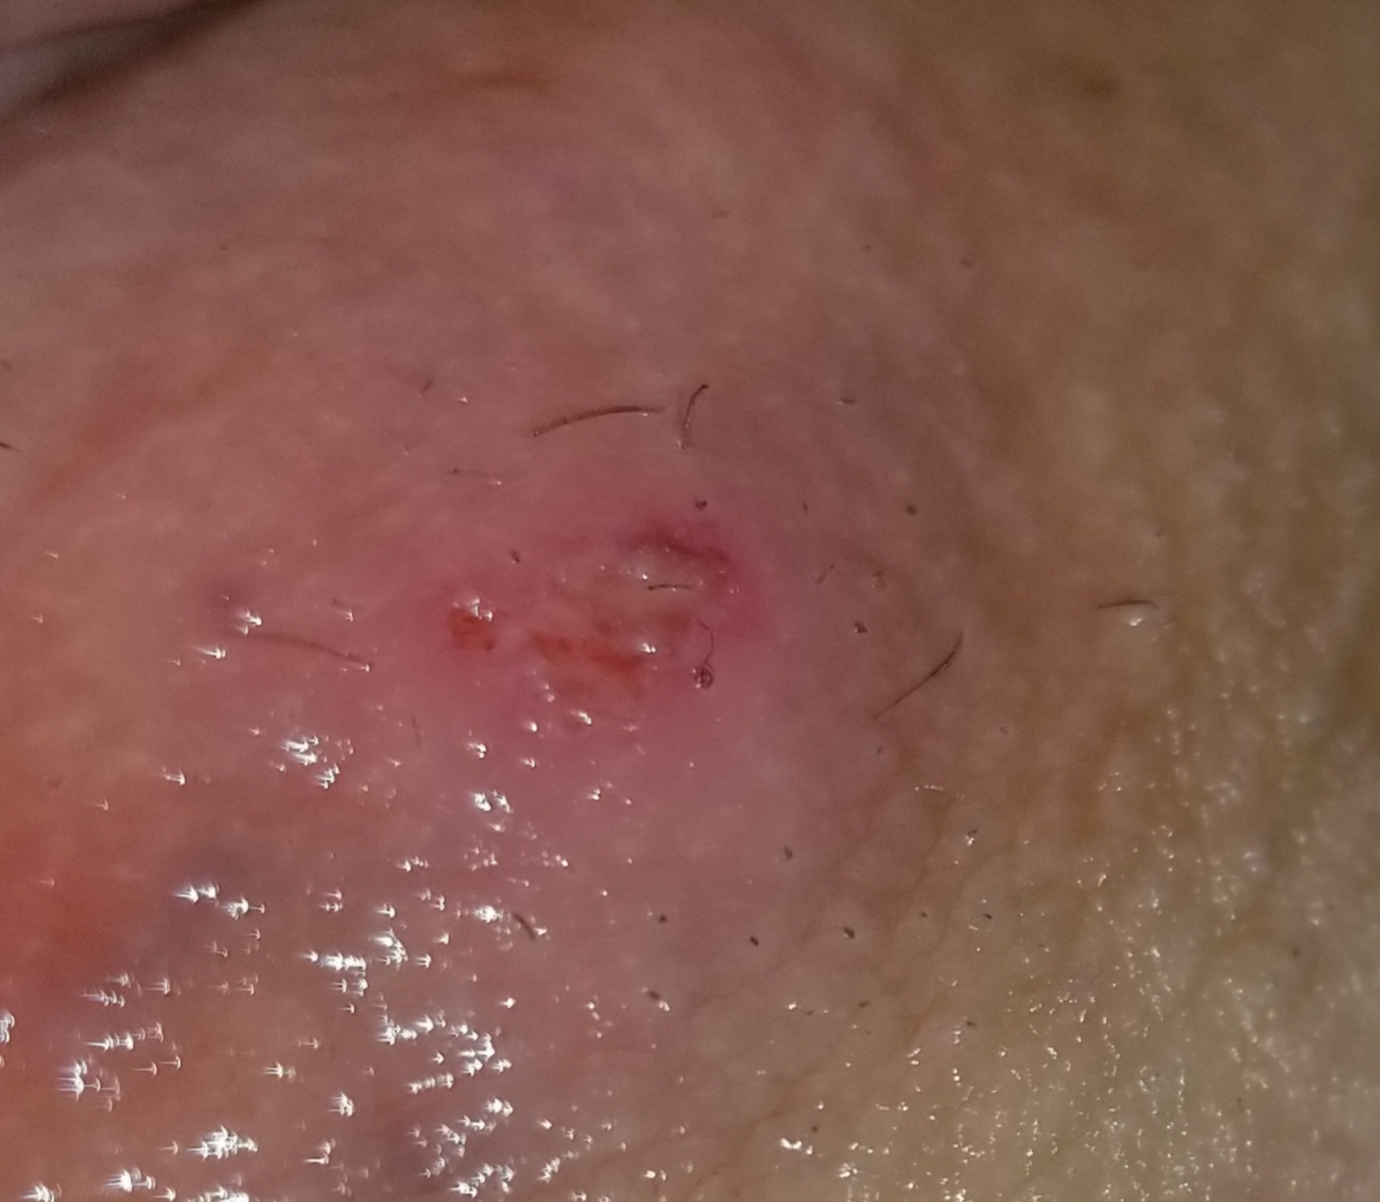 Bumps or herpes